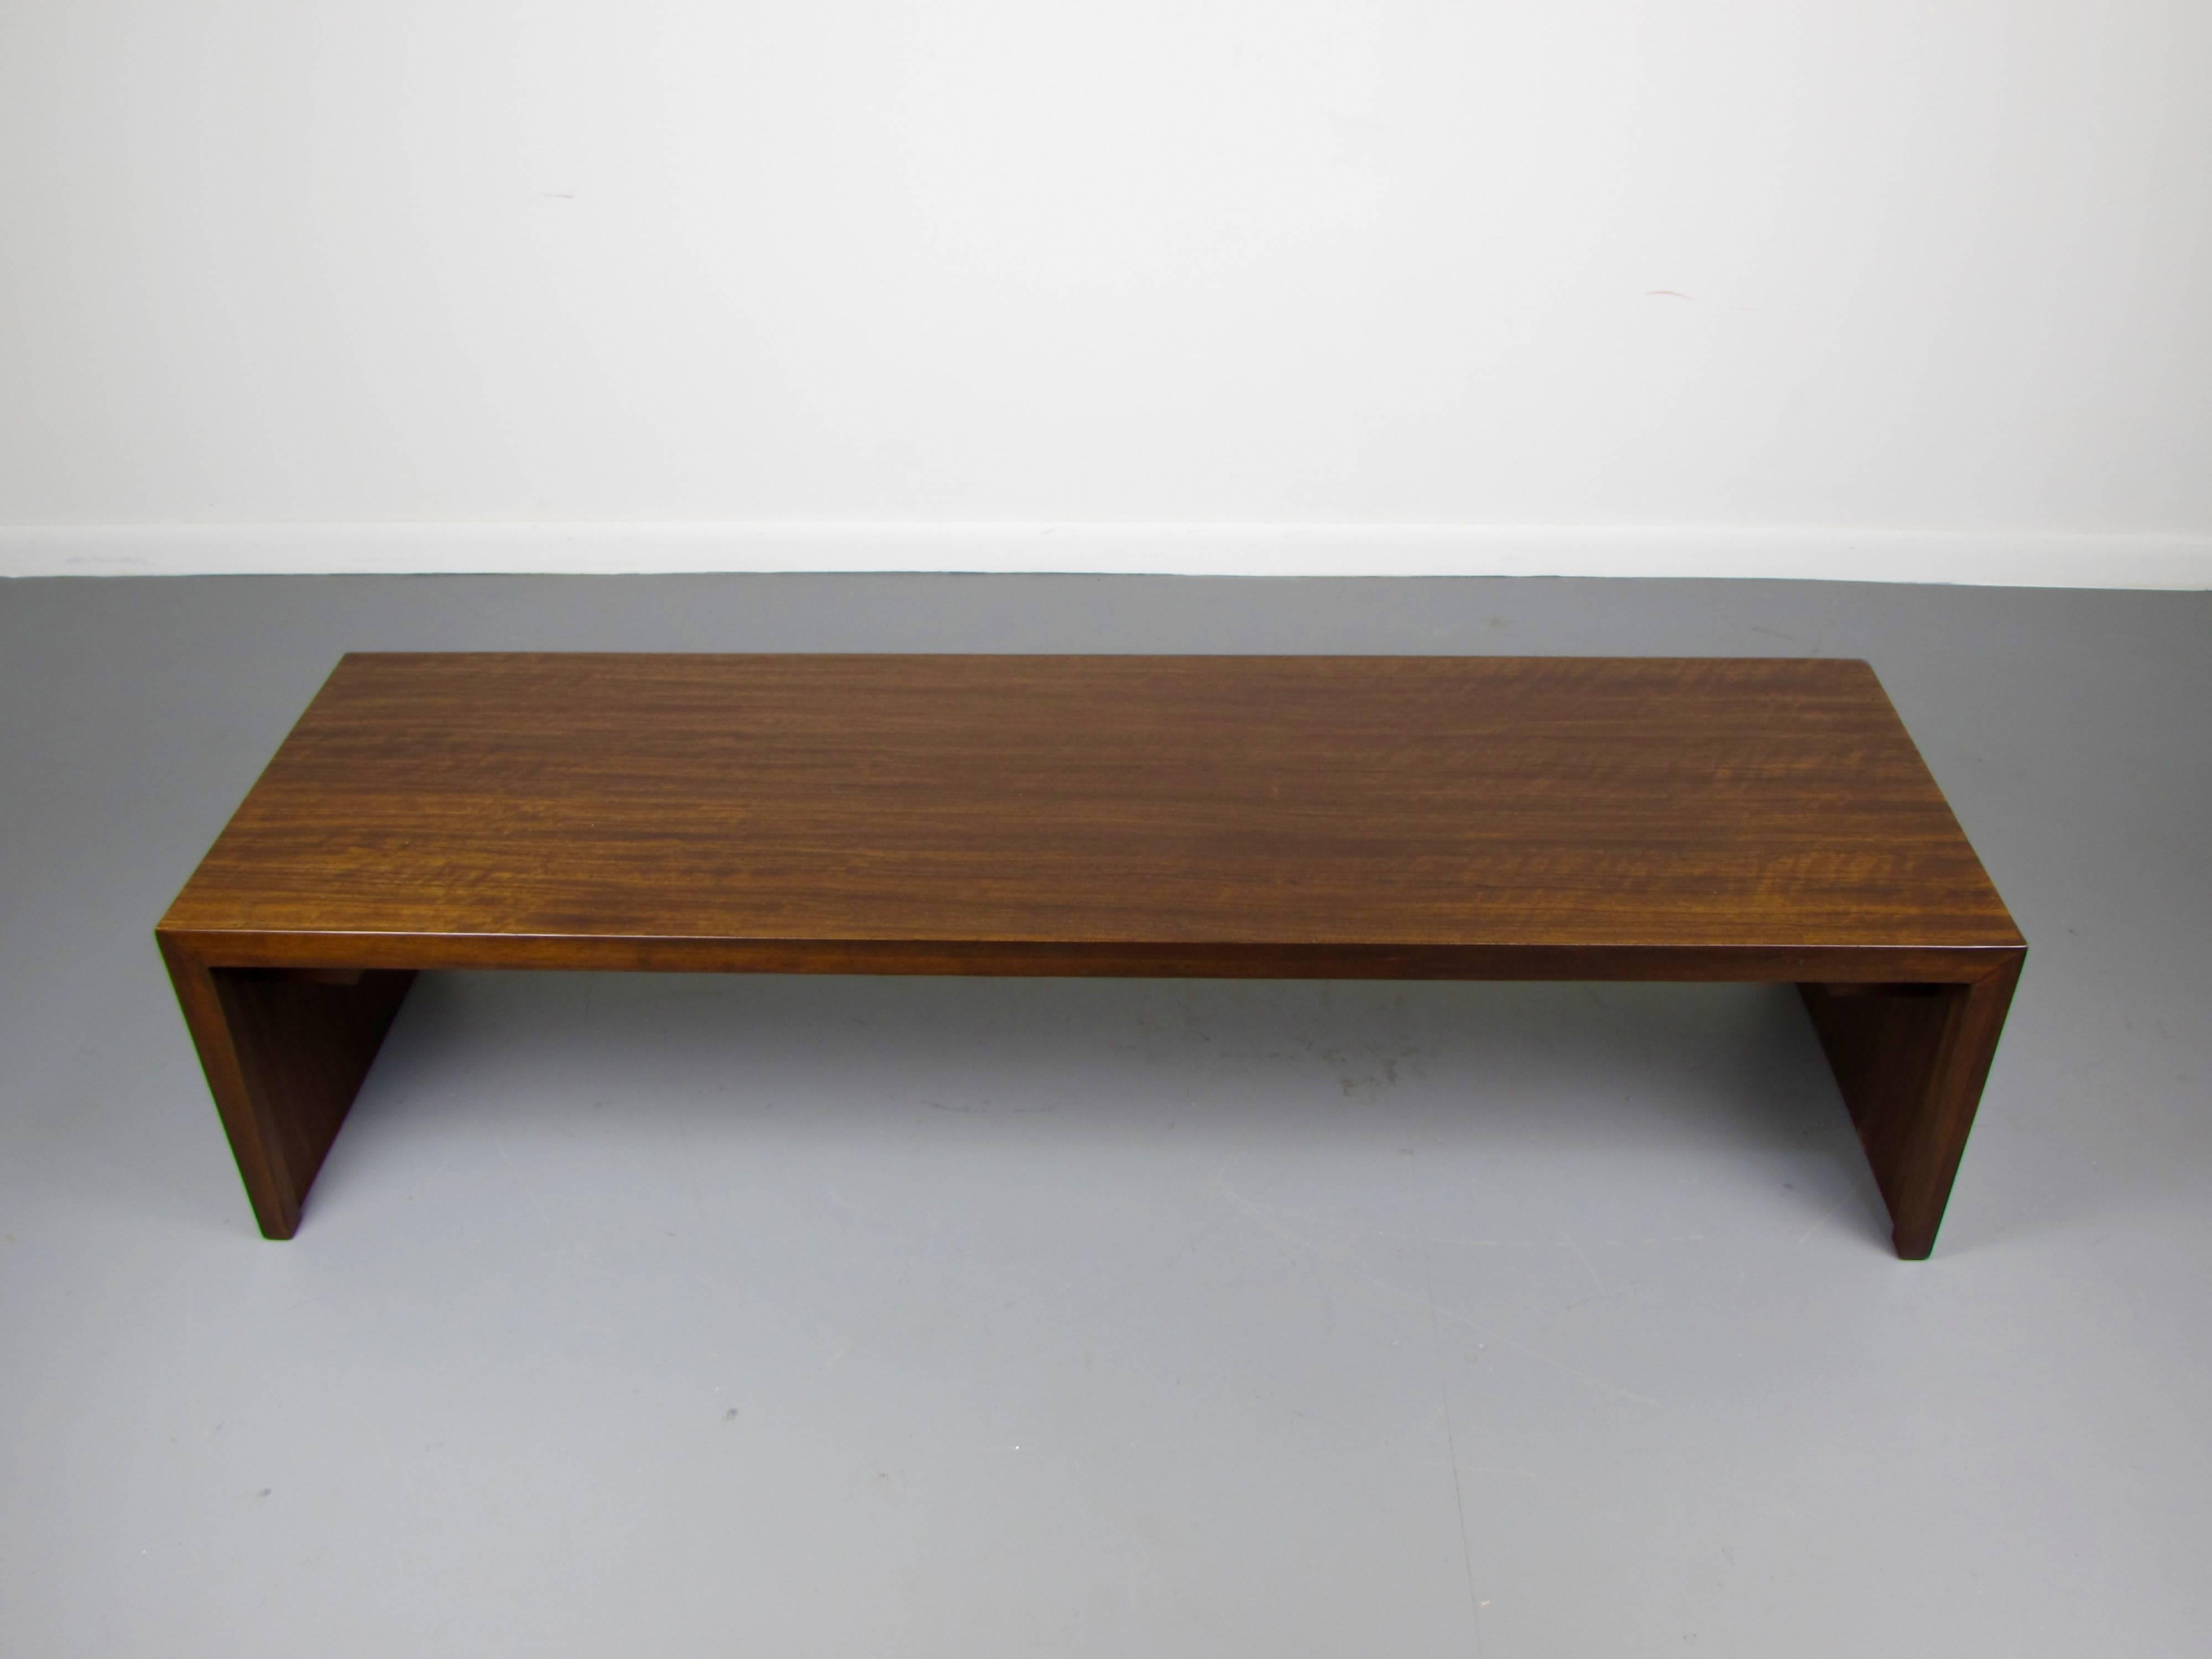 Veneer Handsome Mahogany Bench or Coffee Table by Milo Baughman for Drexel, 1950s